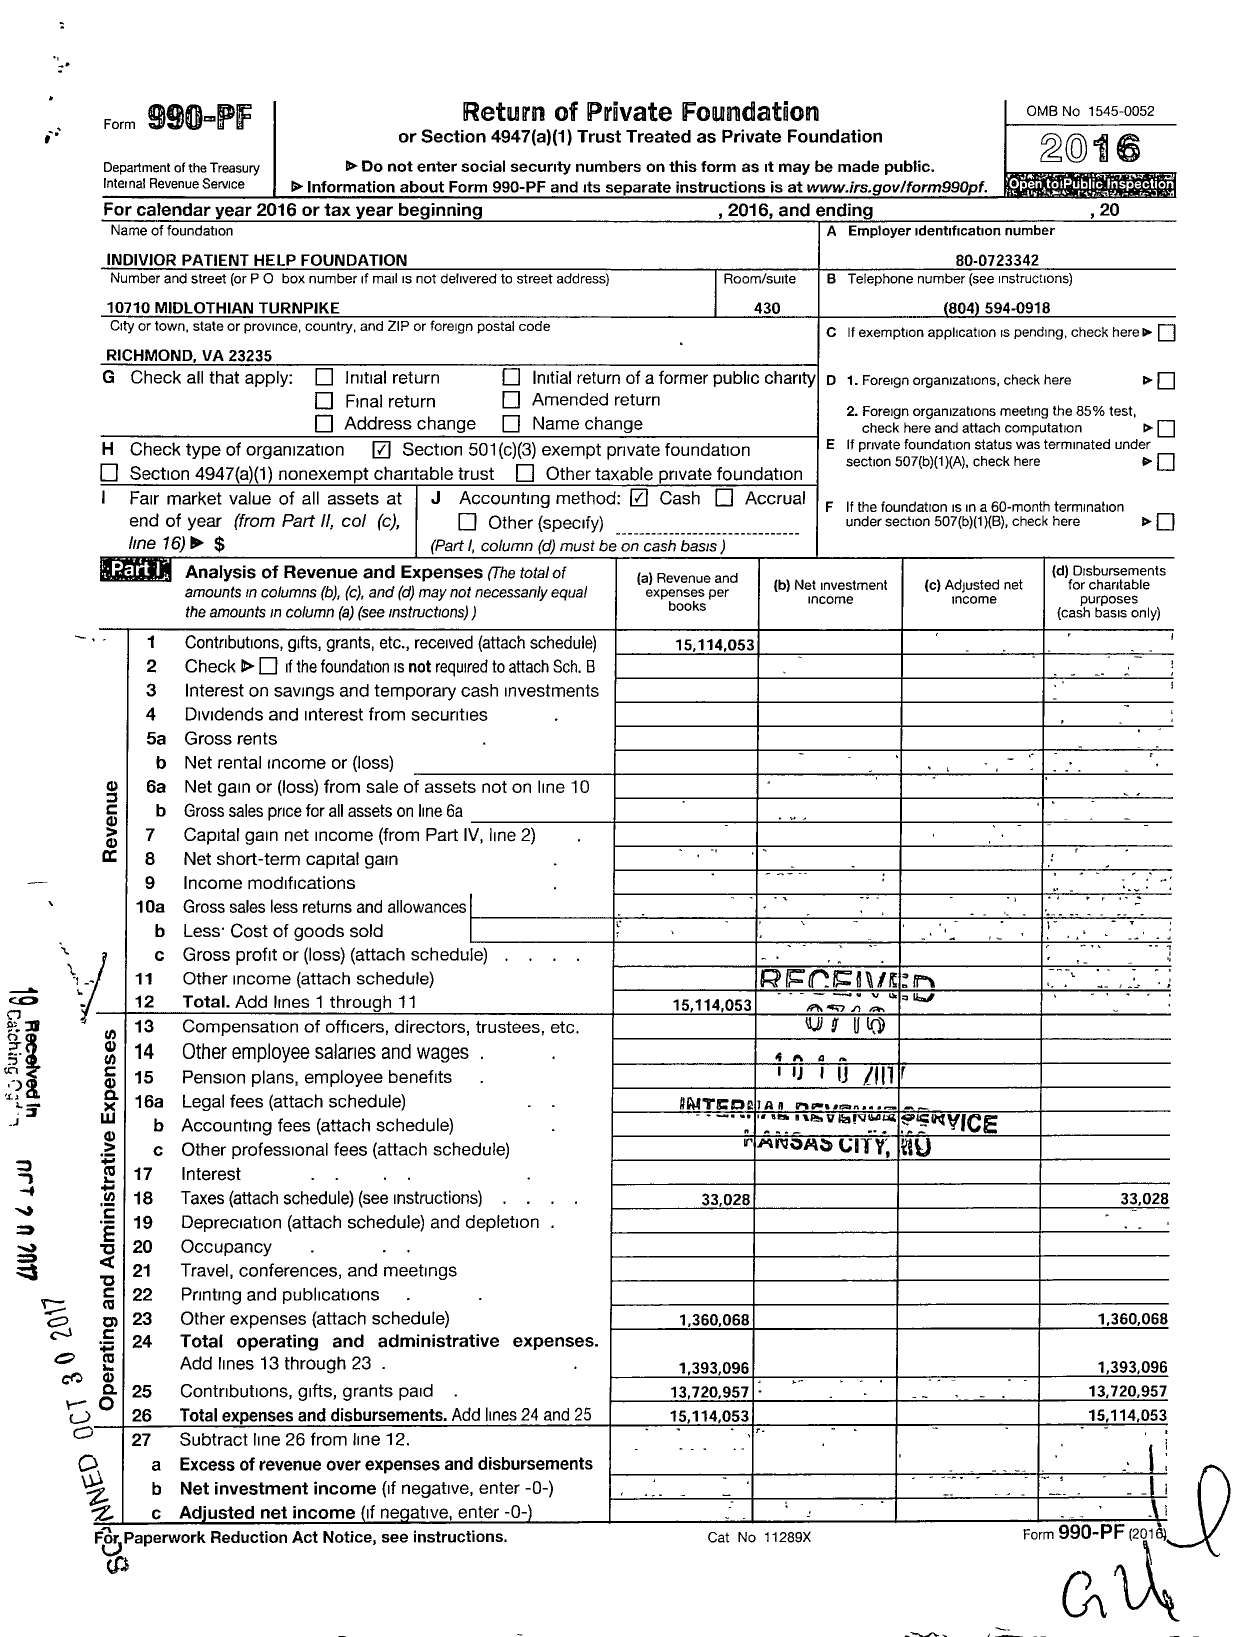 Image of first page of 2016 Form 990PF for Indivior Patient Help Foundation